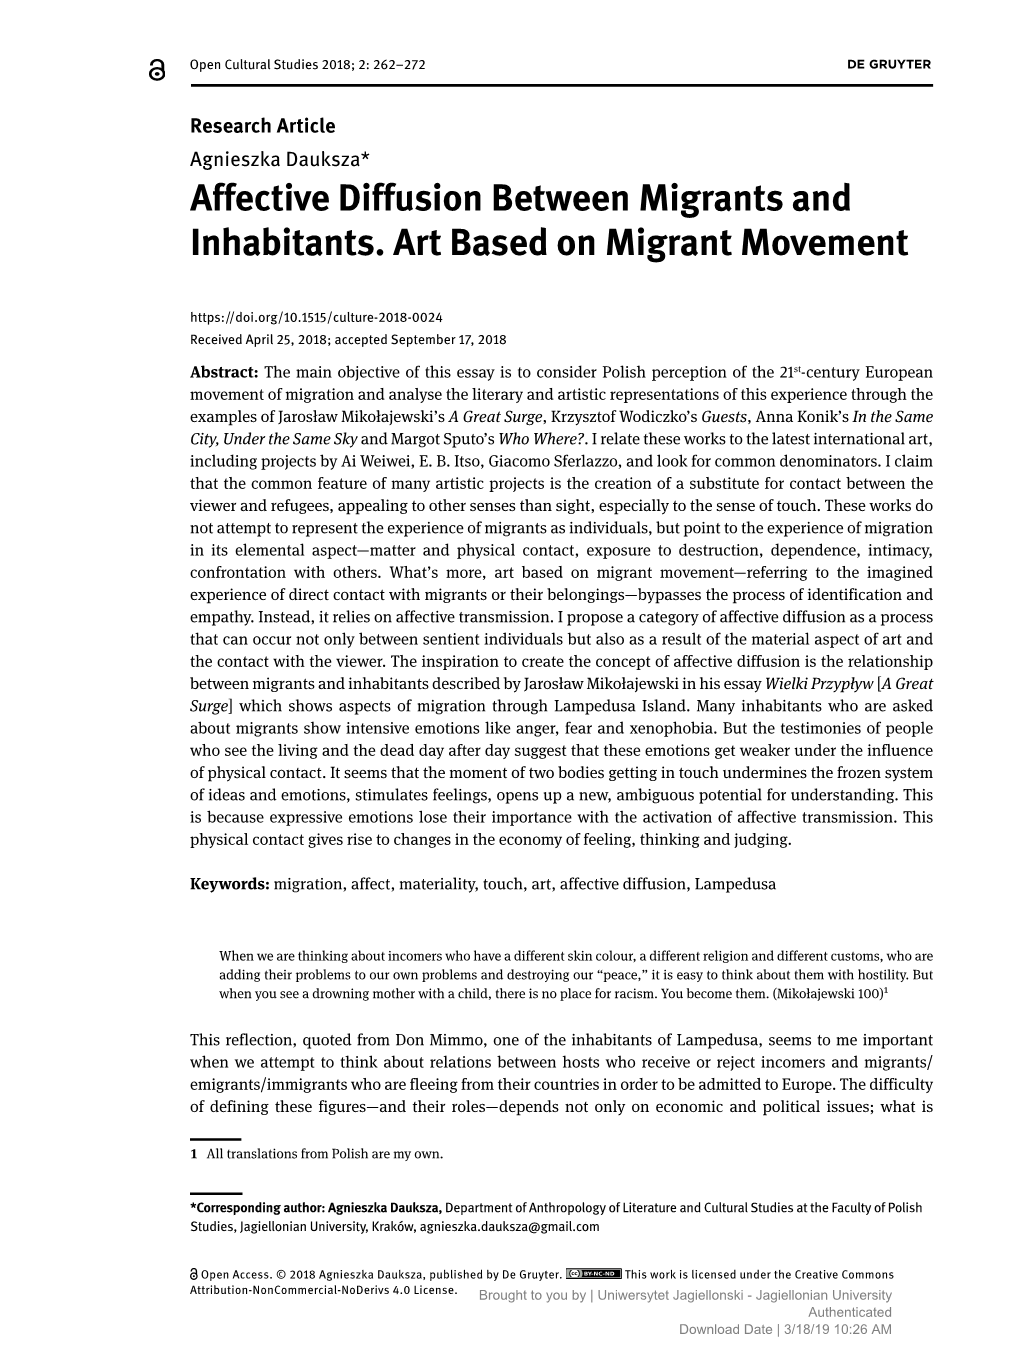 Affective Diffusion Between Migrants and Inhabitants. Case Of